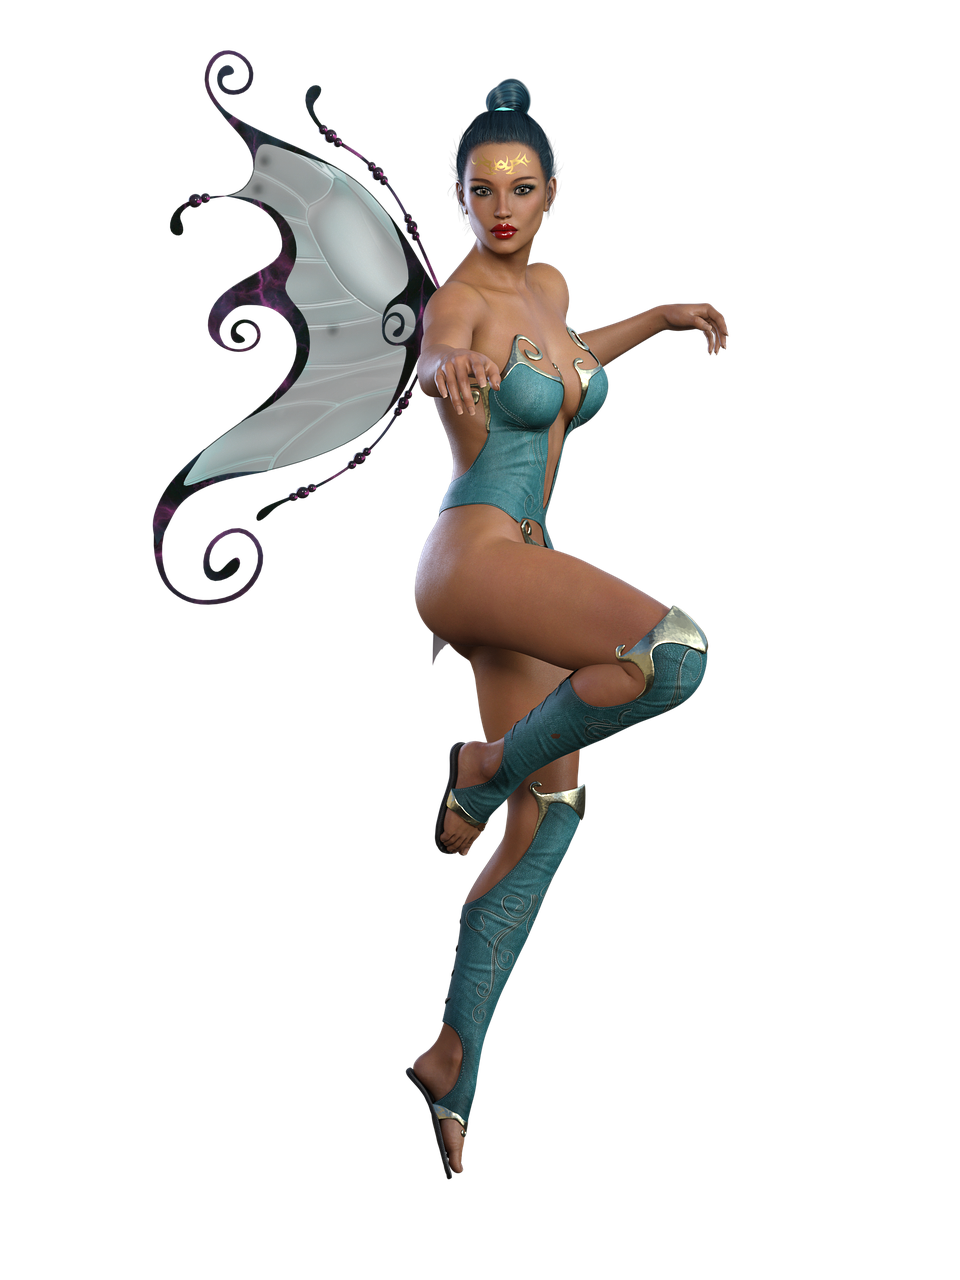 a woman dressed as a fairy flying through the air, inspired by Daphne Allen, zbrush central contest winner, evil standing smiling pose, kitana from mortal kombat, fbx, cyan corset